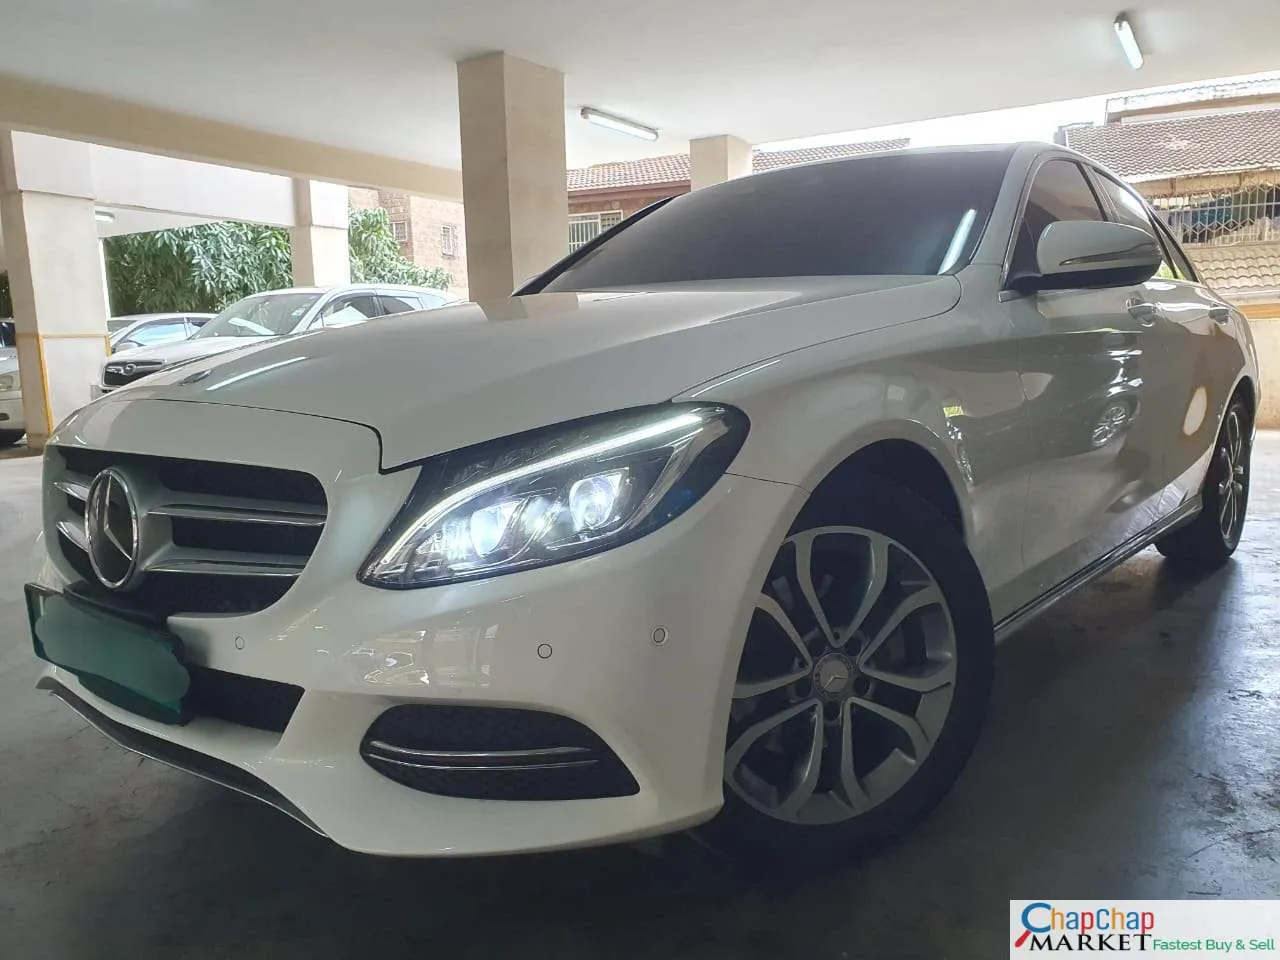 Cars Cars For Sale-Mercedes Benz c200 🔥 You Pay 30% DEPOSIT Trade in OK Mercedes Benz c200 for sale in kenya hire purchase installments EXCLUSIVE 9